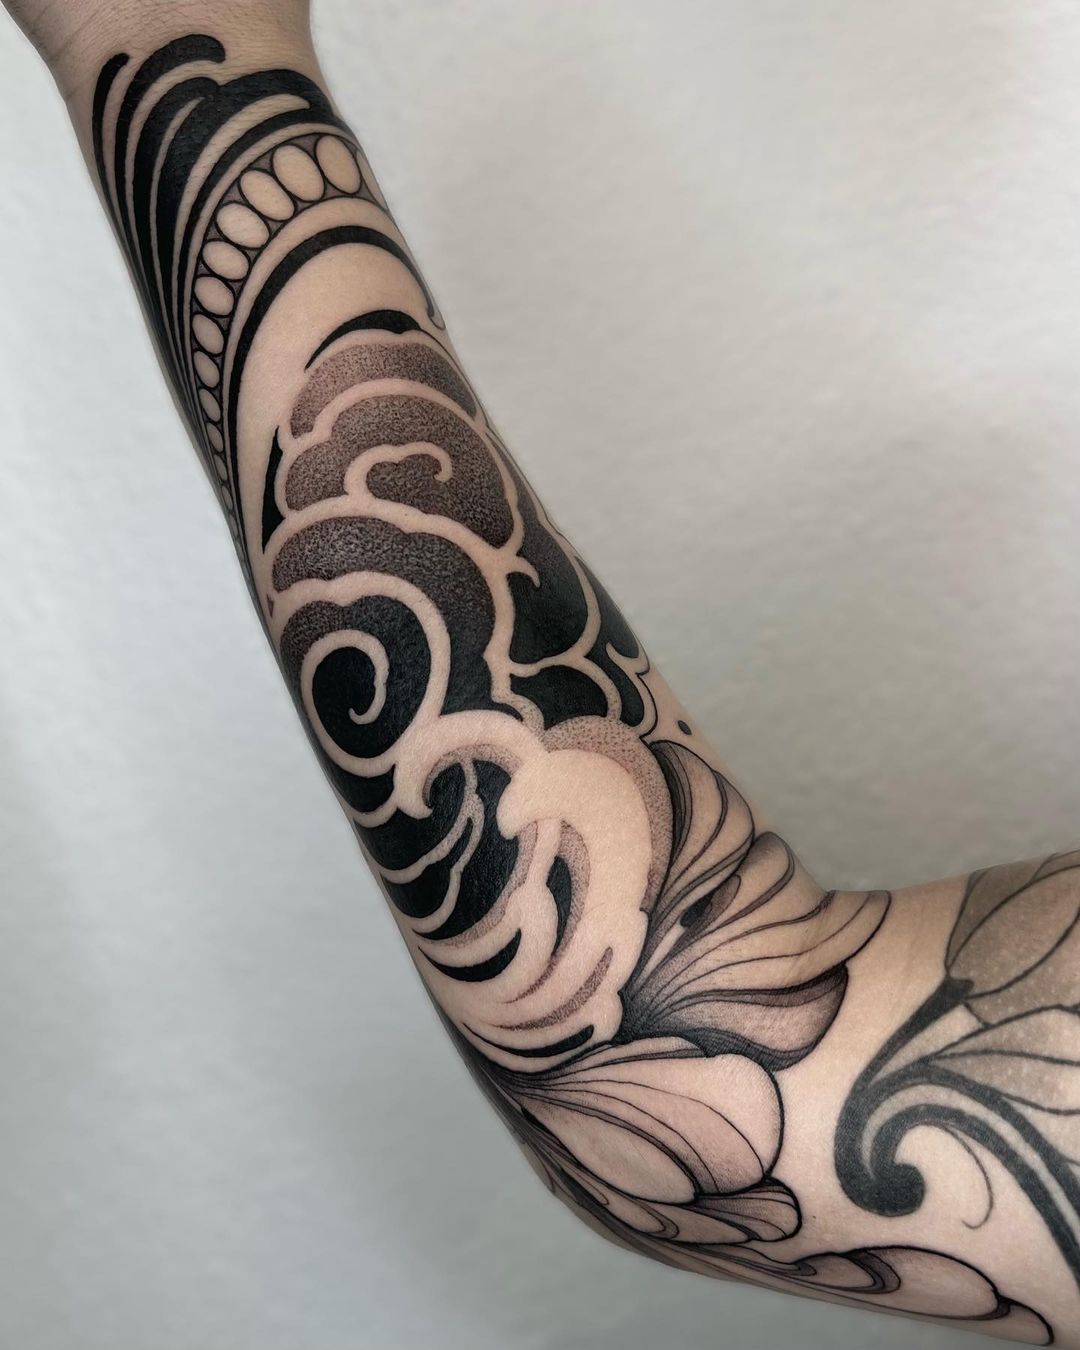 Neo traditional tattoo on arm by annabellemeister